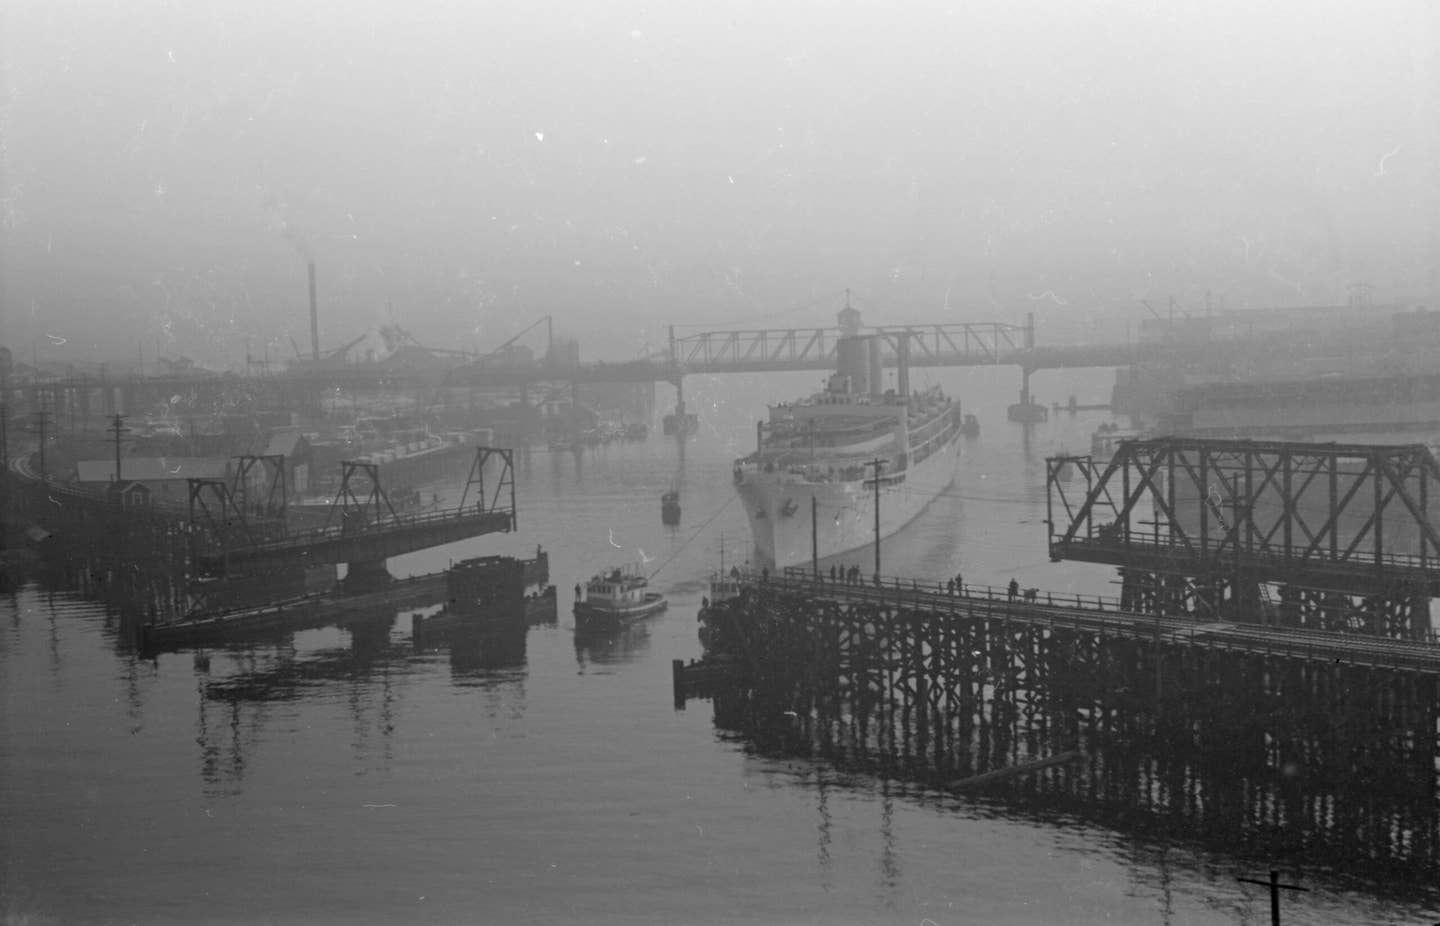 HMS <em>Menestheus</em> being towed out of False Creek toward English Bay by two tugboats on September 1, 1945. Photo likely taken from the south side of Burrard Street Bridge while facing south-east, Vancouver, British Columbia. <em>James Crookall via Wikimedia Commons</em>